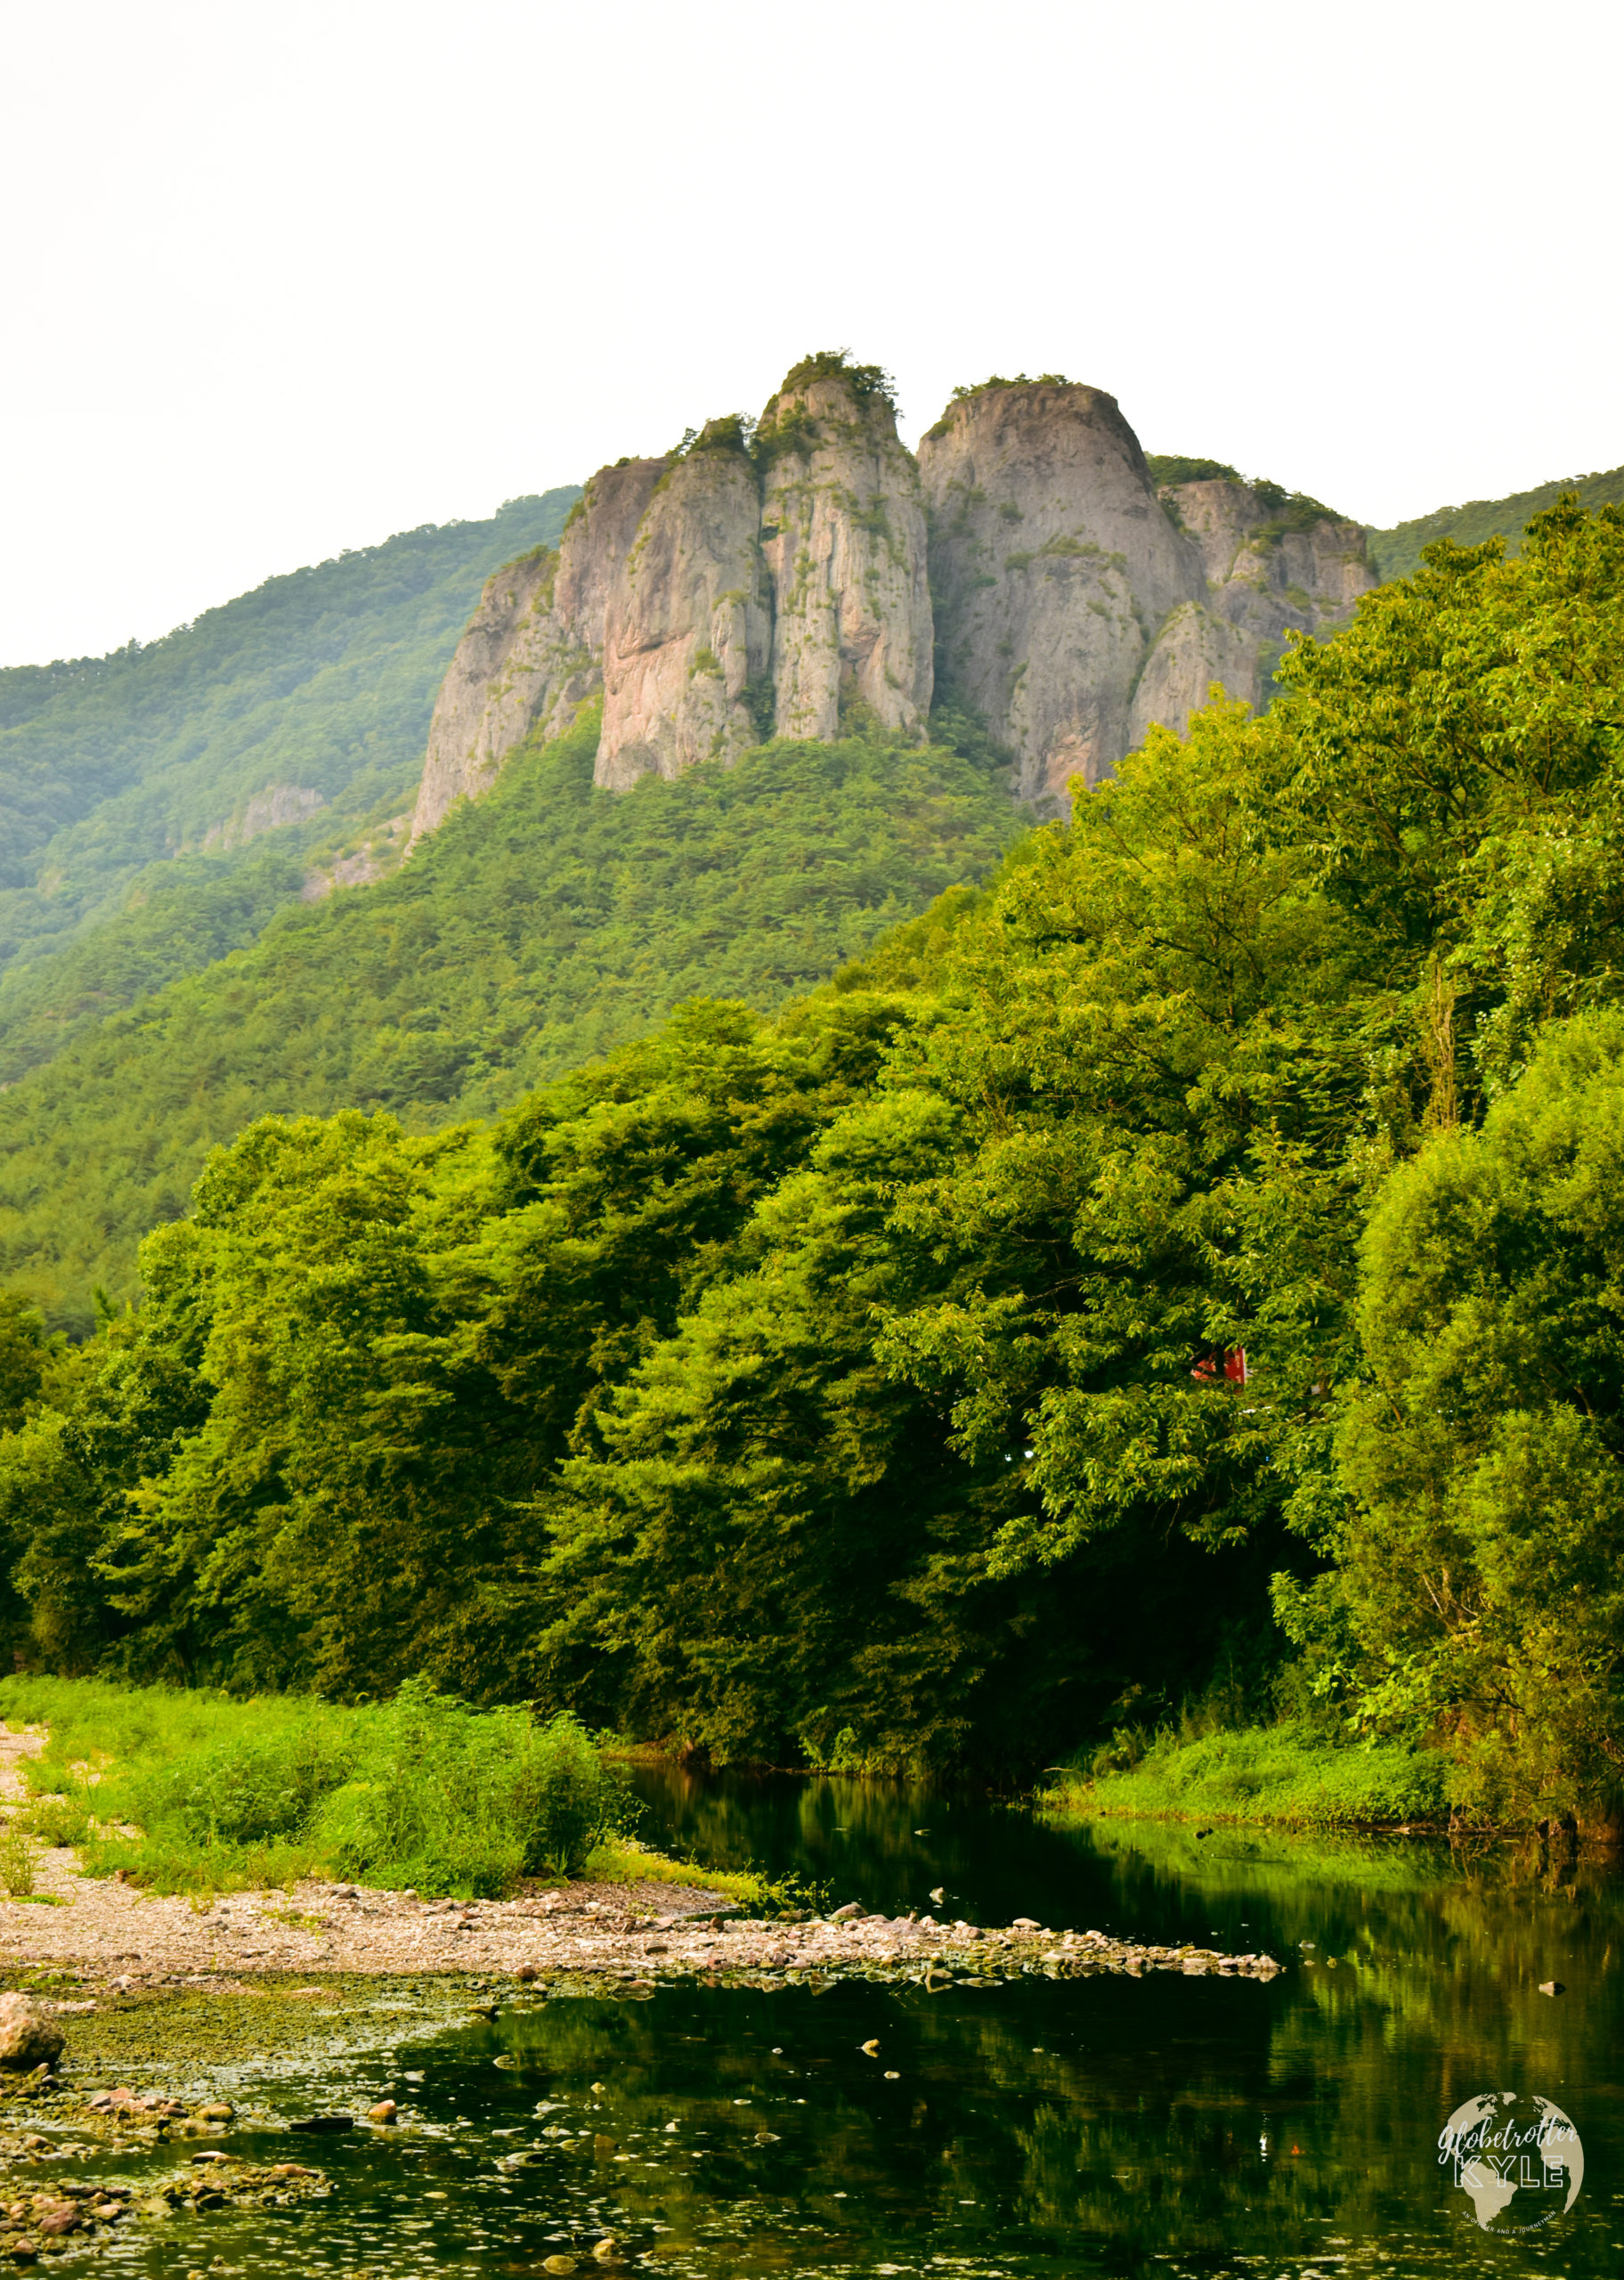 rocks rise above a forested valley in front of a river in south korea juwangsan national park